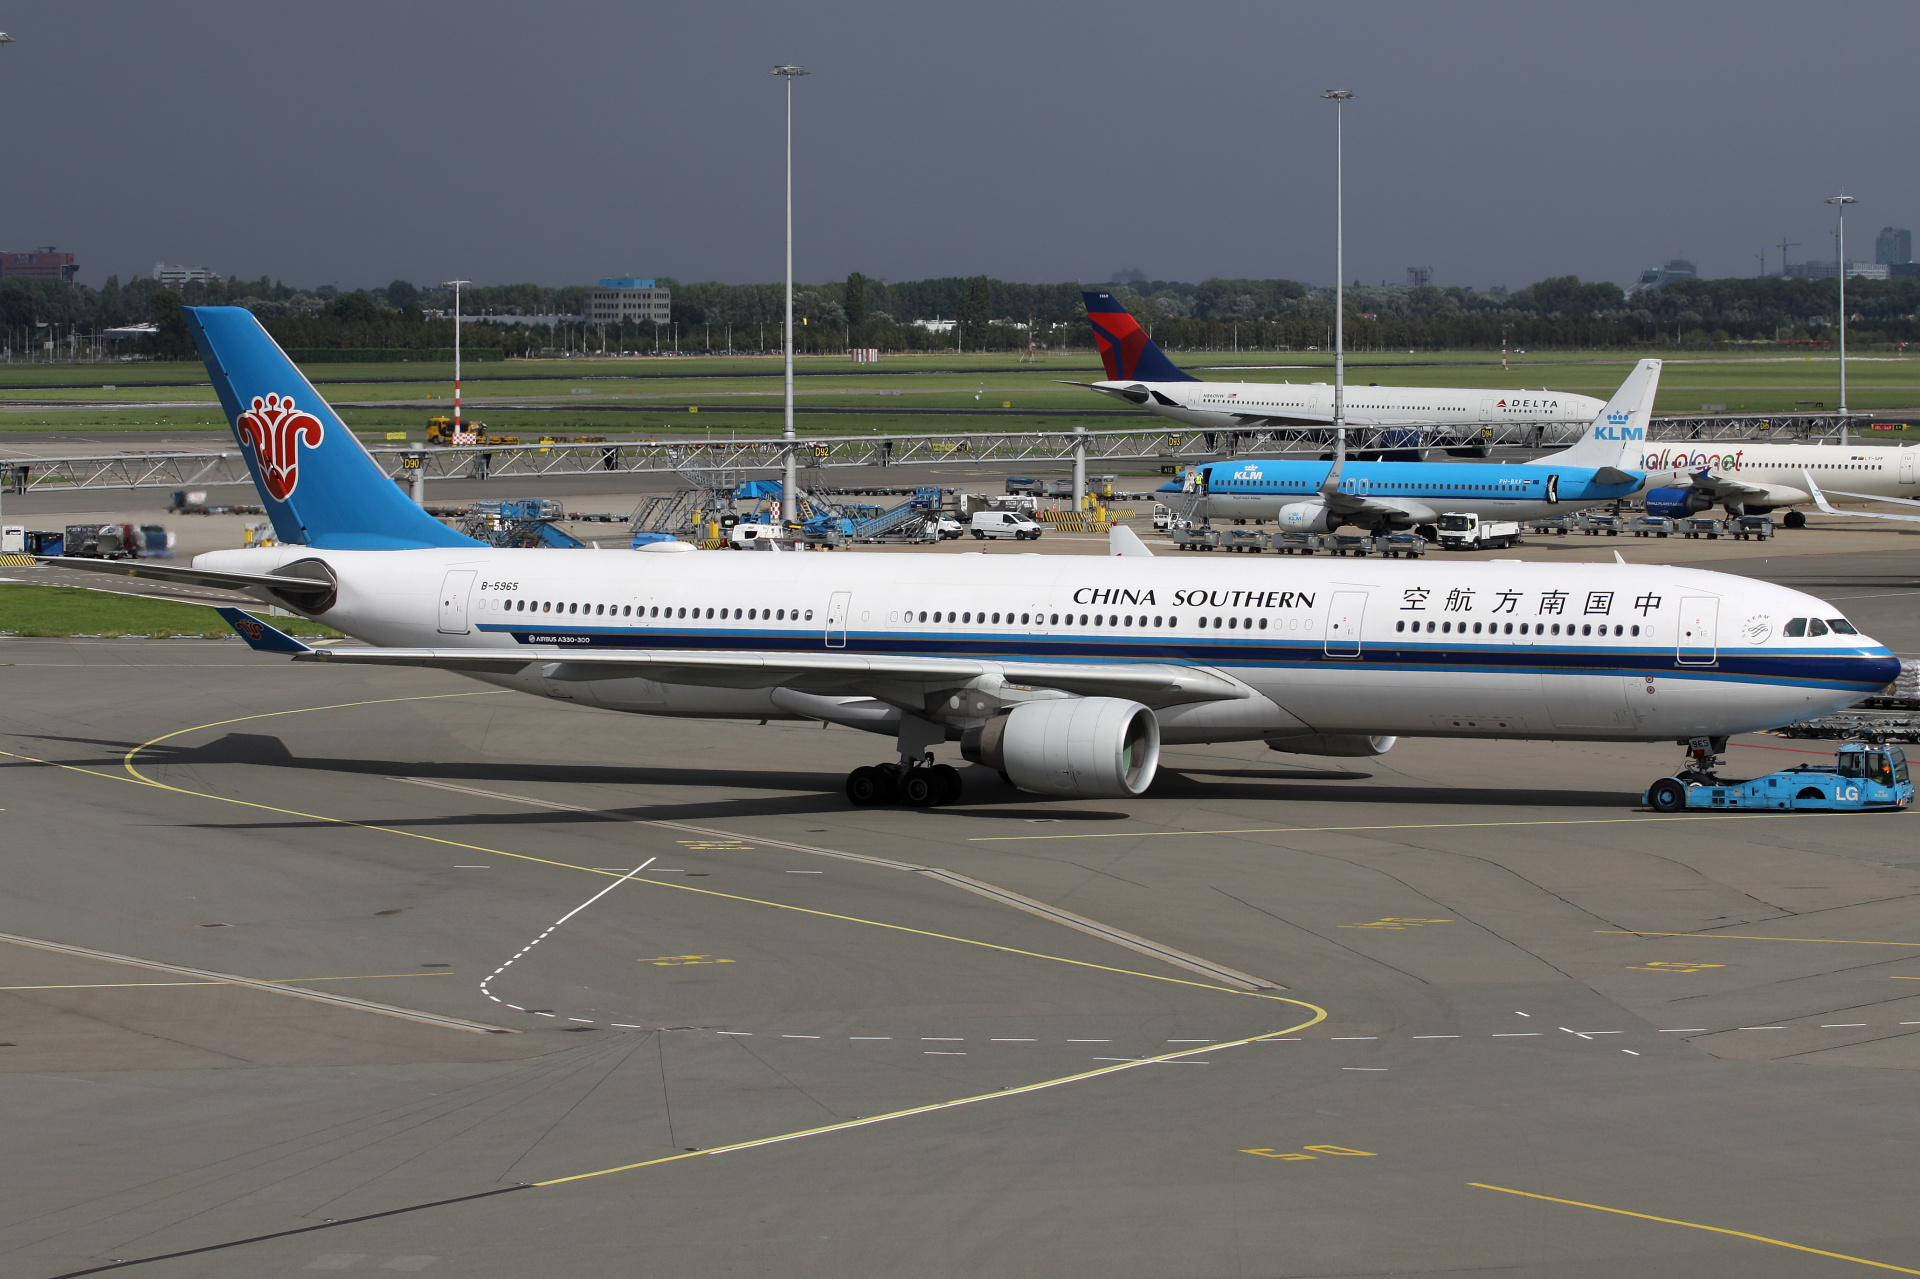 B-5965, China Southern Airlines (Samoloty » Spotting na Schiphol » Airbus A330-300)